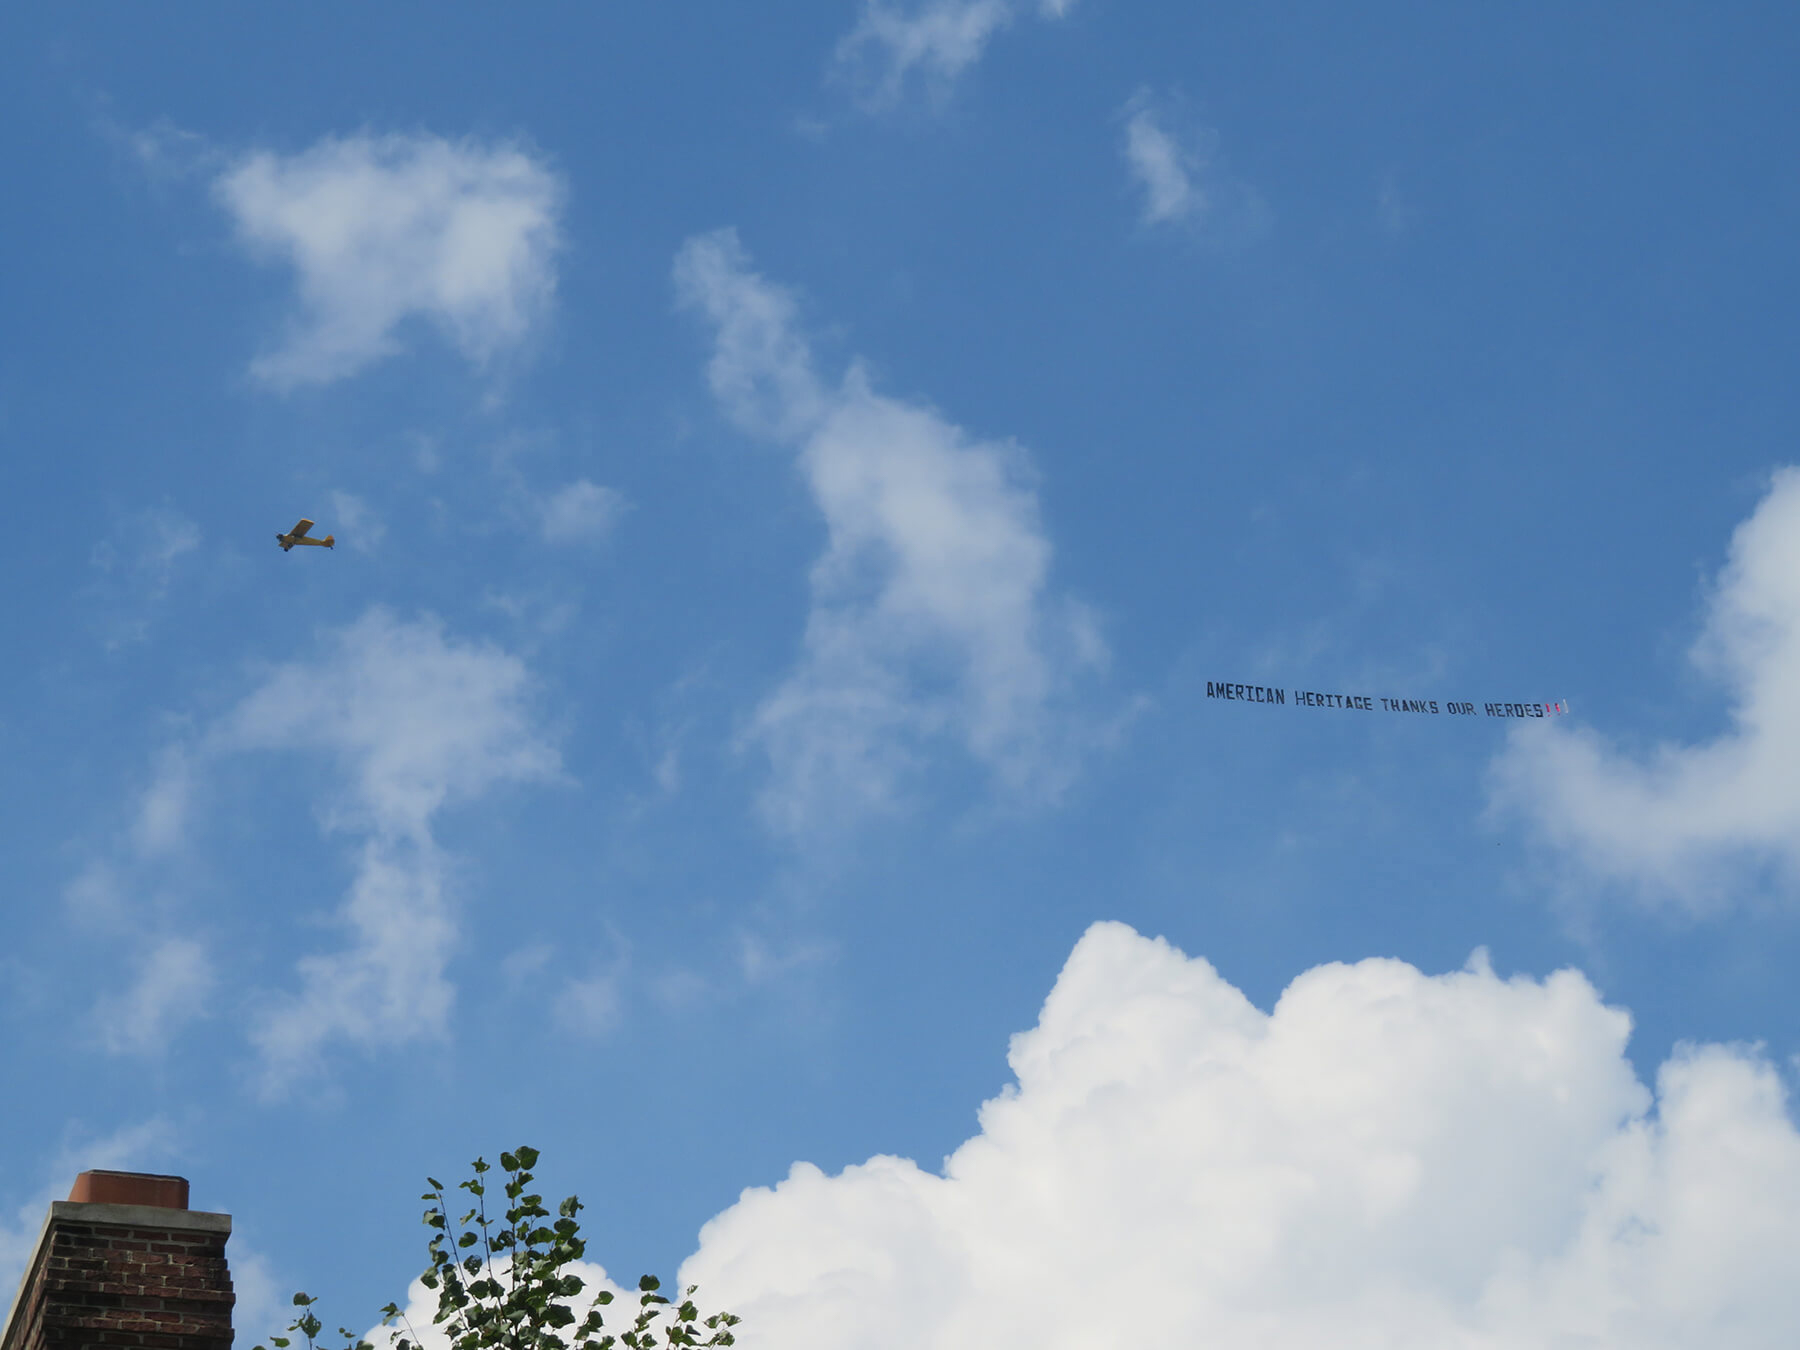 Airplane with banner that says "American Heritage Thanks Our Heroes" flies over American Heritage's campus.